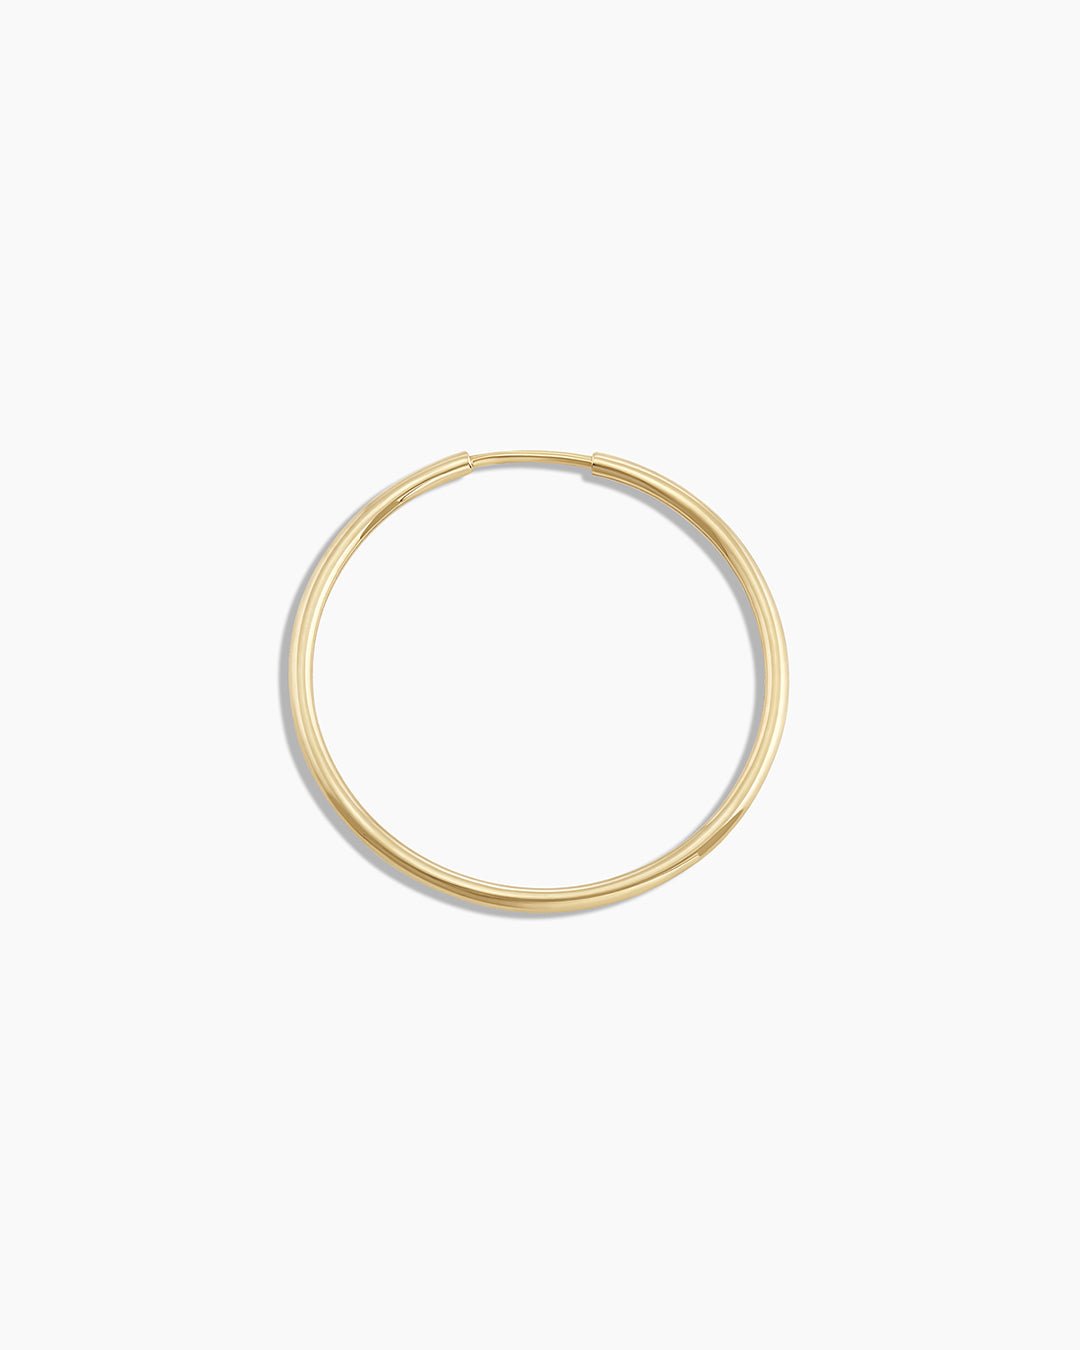 Woman wearing Classic Gold Hoop || option::14k Solid Gold, 22mm, Single